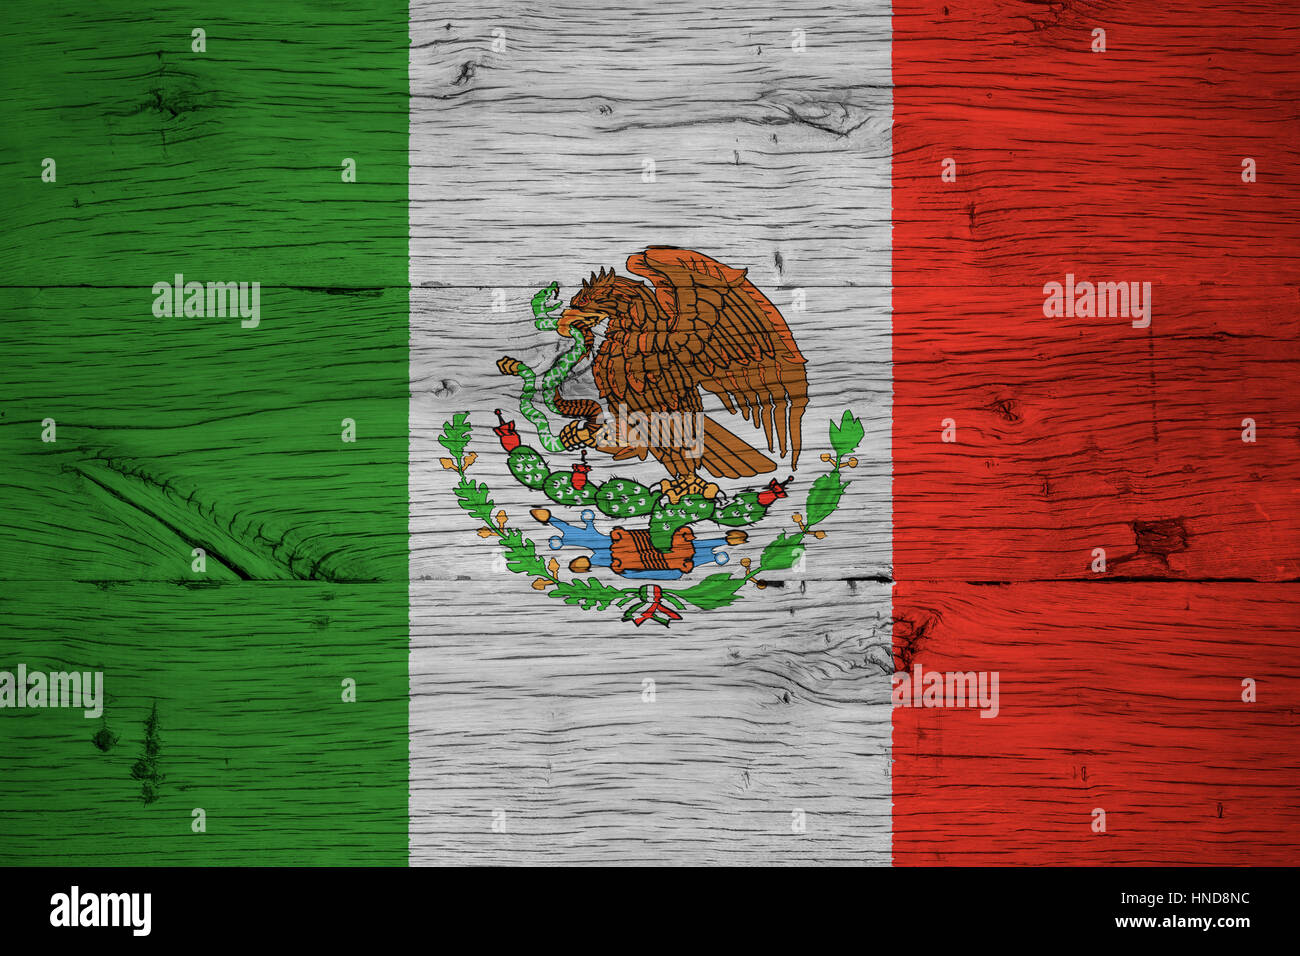 Mexico, Mexican national flag painted on old oak wood. Painting is colorful on planks of old train carriage. Stock Photo